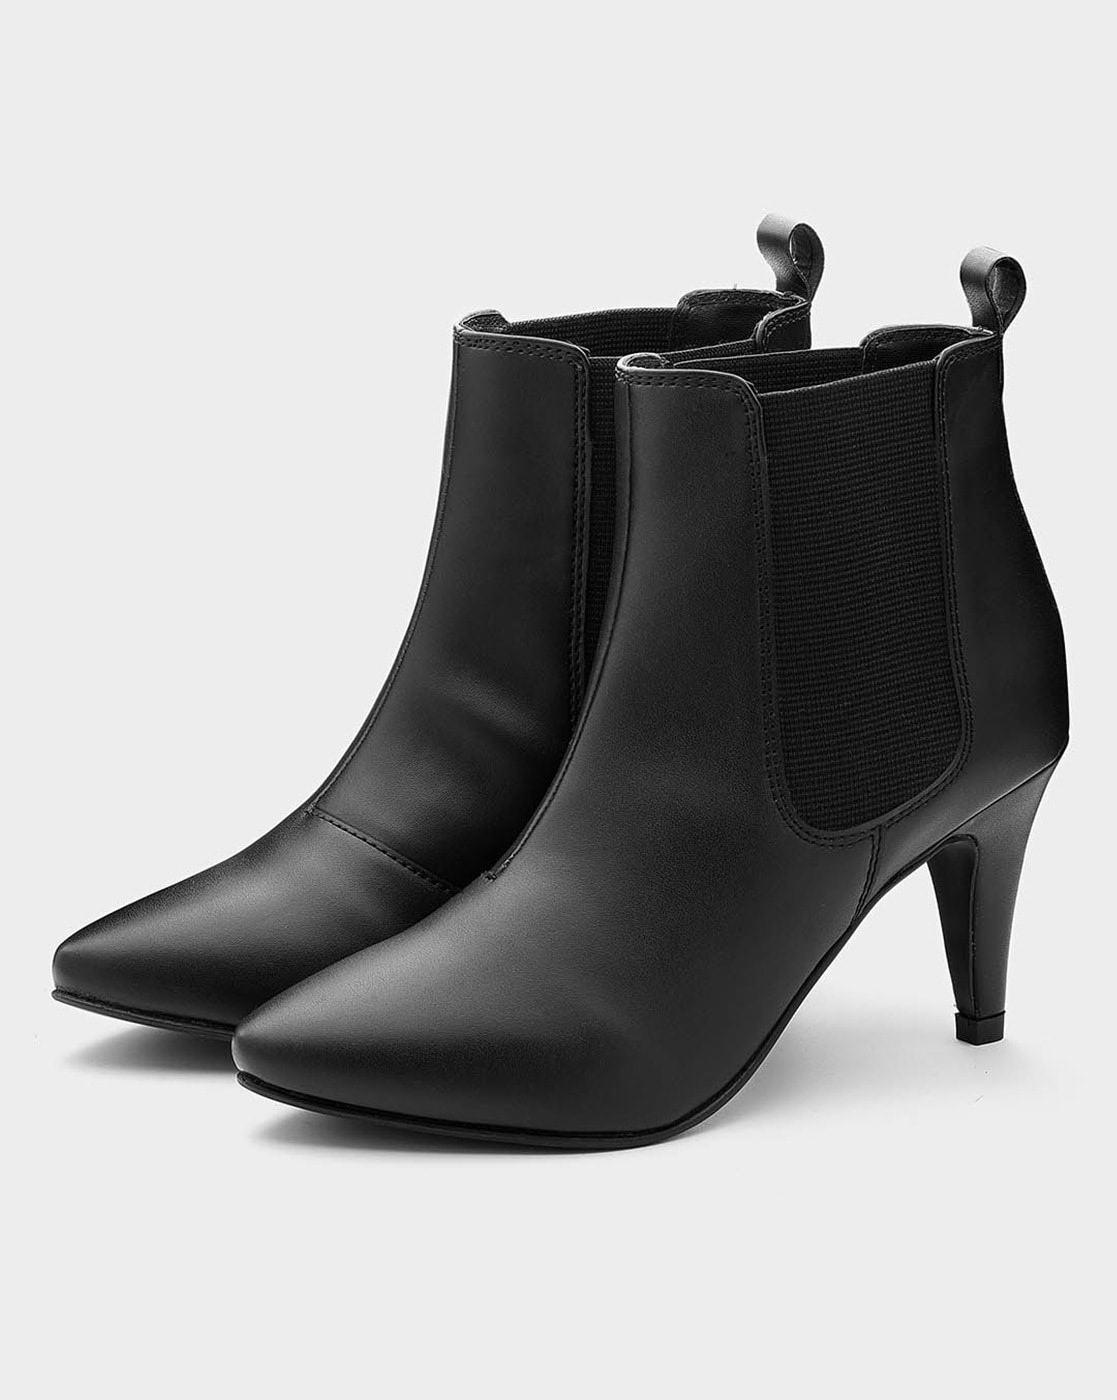 Discover 117+ black heeled boots